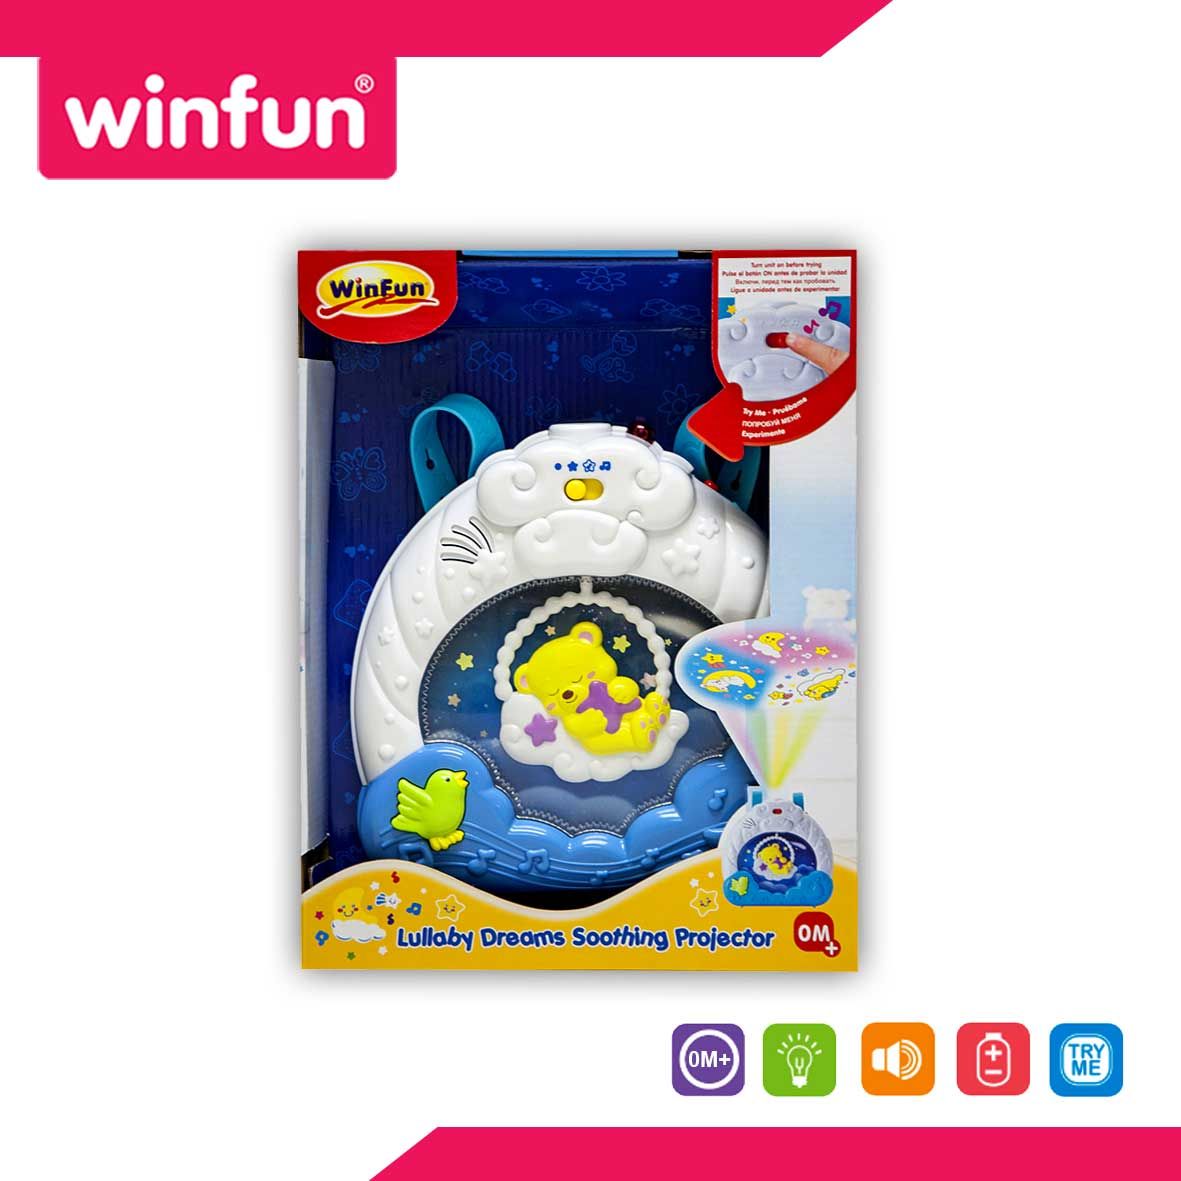 Winfun Lullaby Dreams Soothing Projector - 1